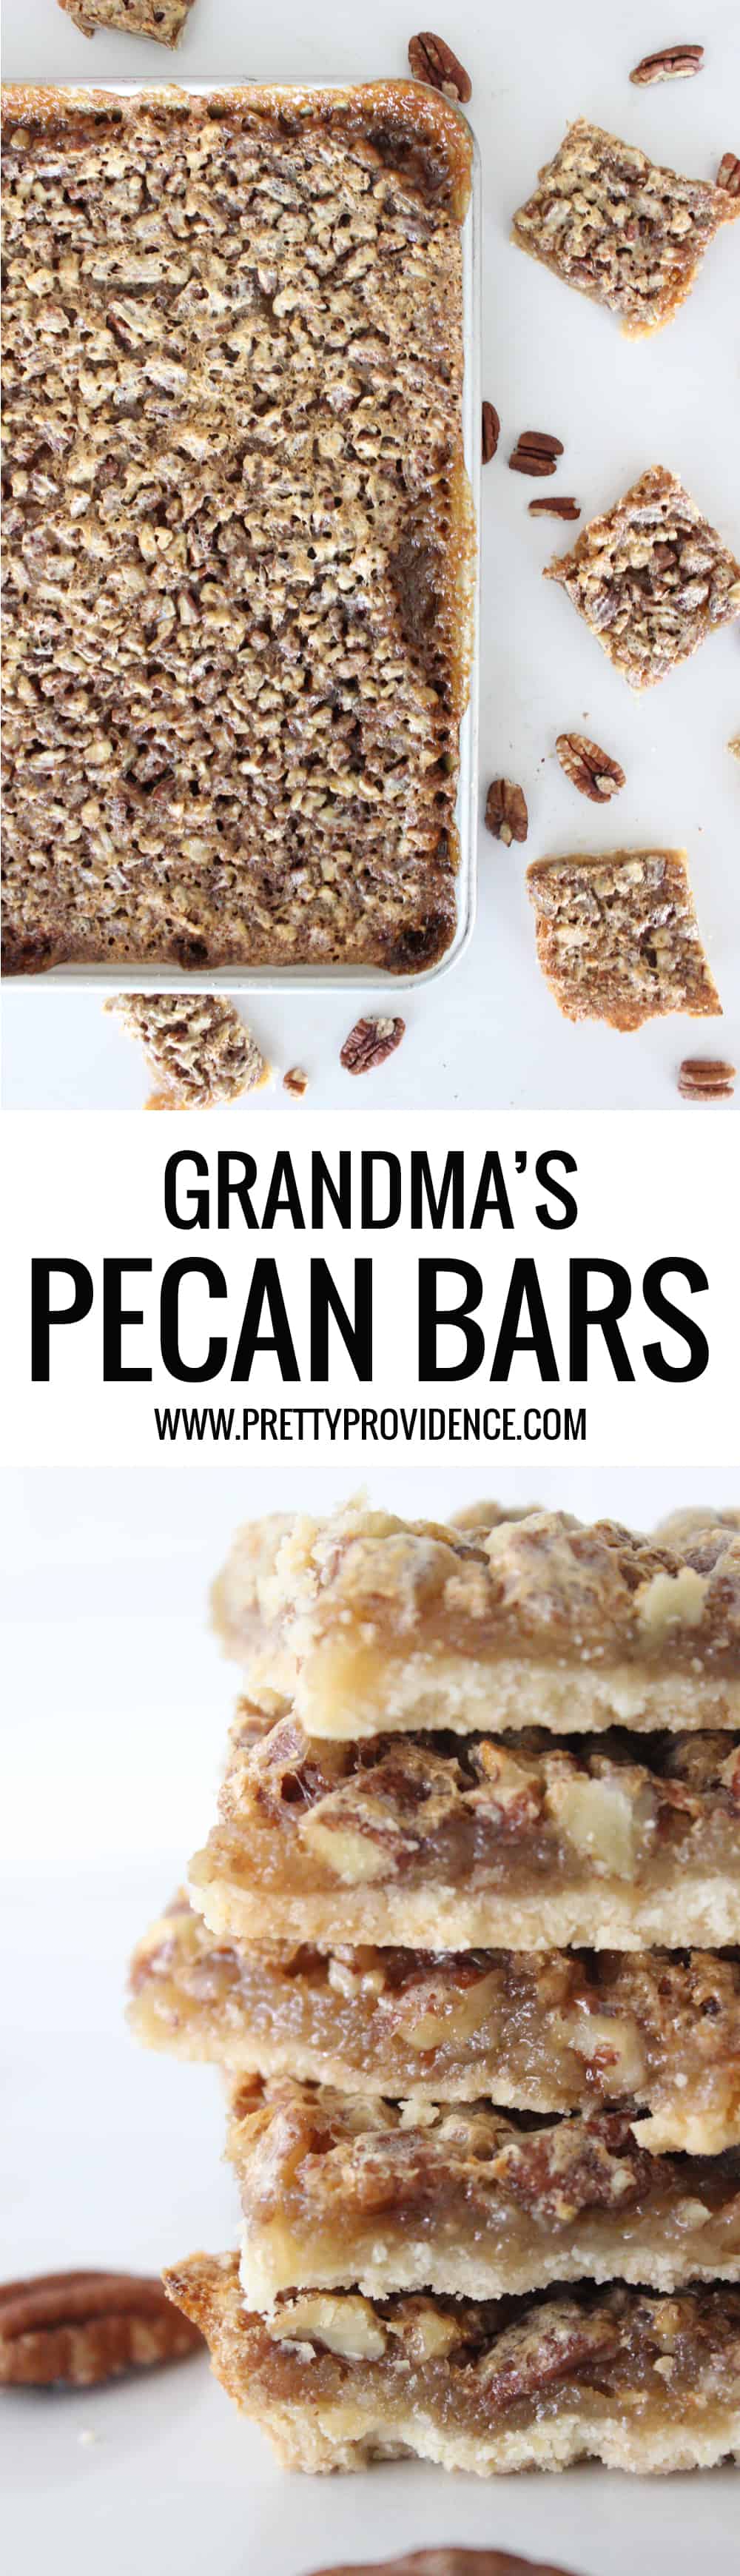 Okay these Pecan bars are AMAZING!! Way better/easier than pecan pie and makes a TON! 